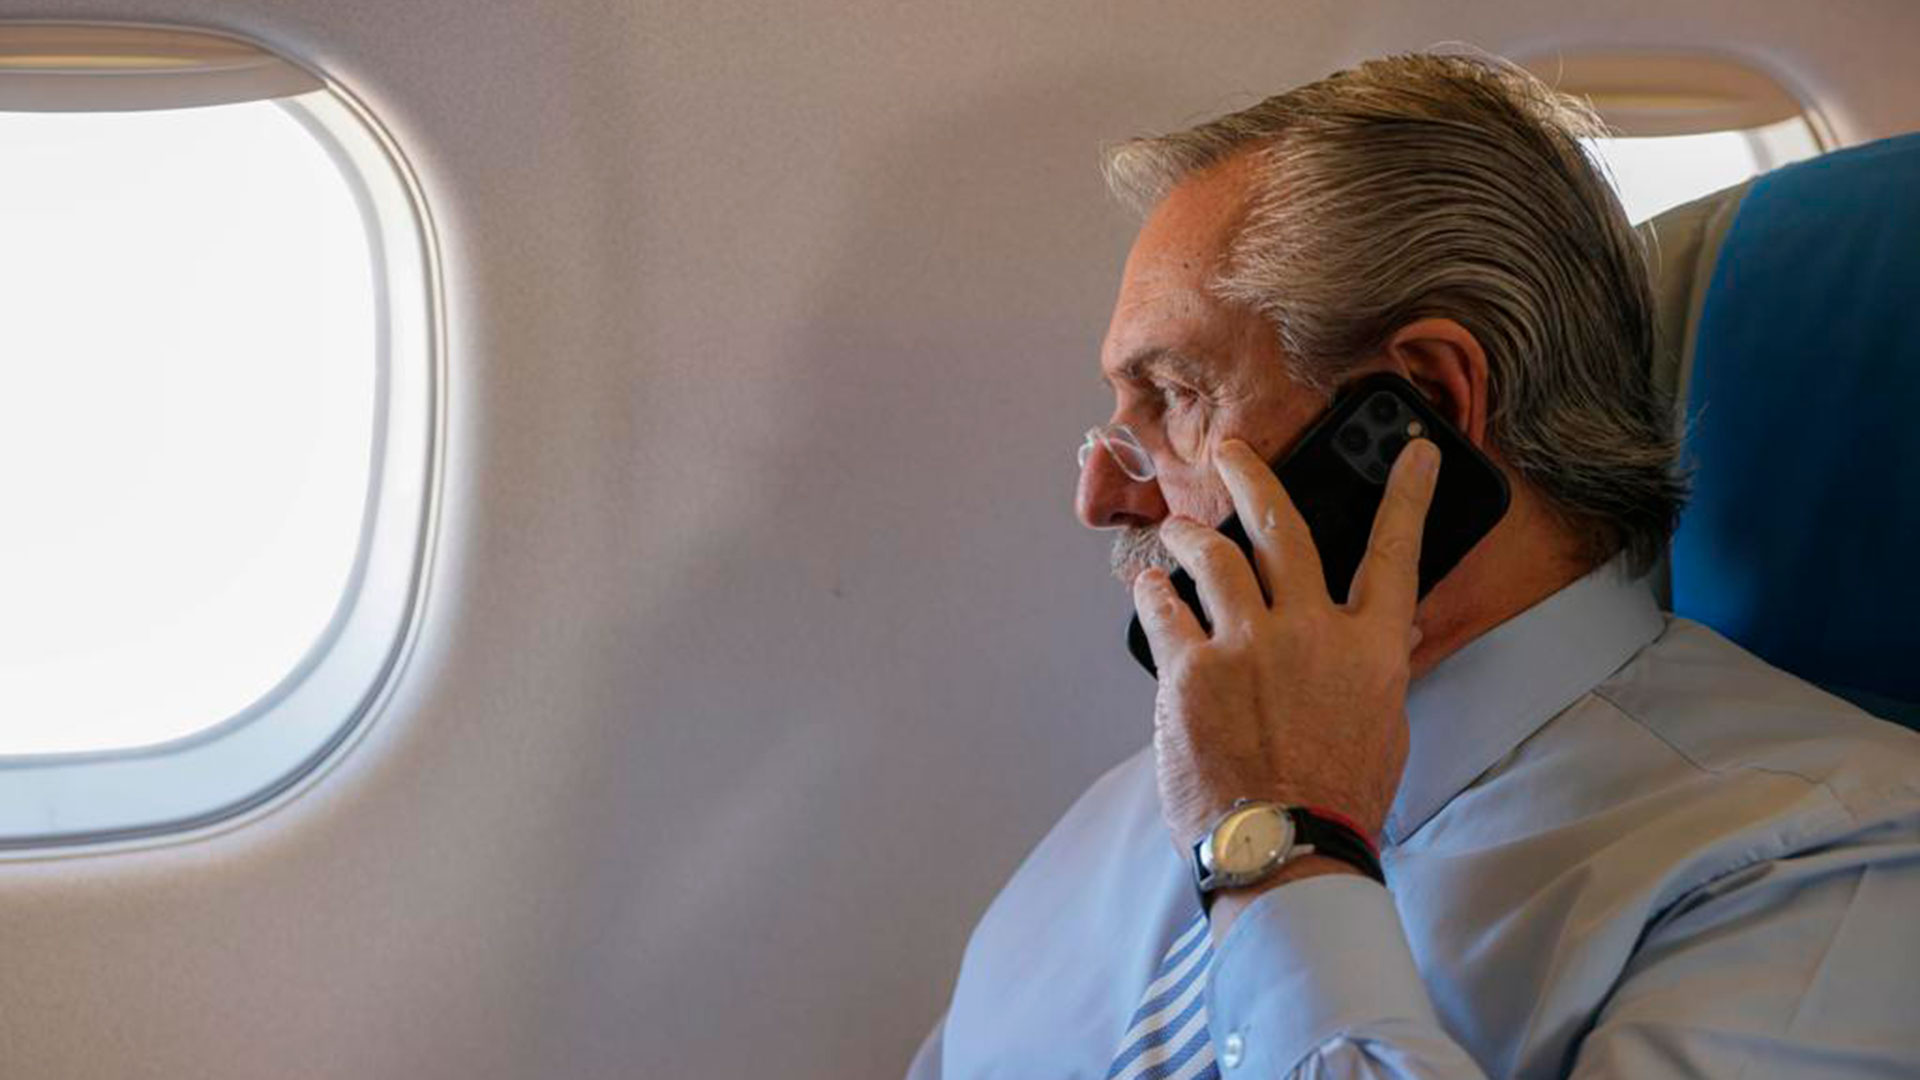 Alberto Fernandez talks on the phone during a trip to Brazil.